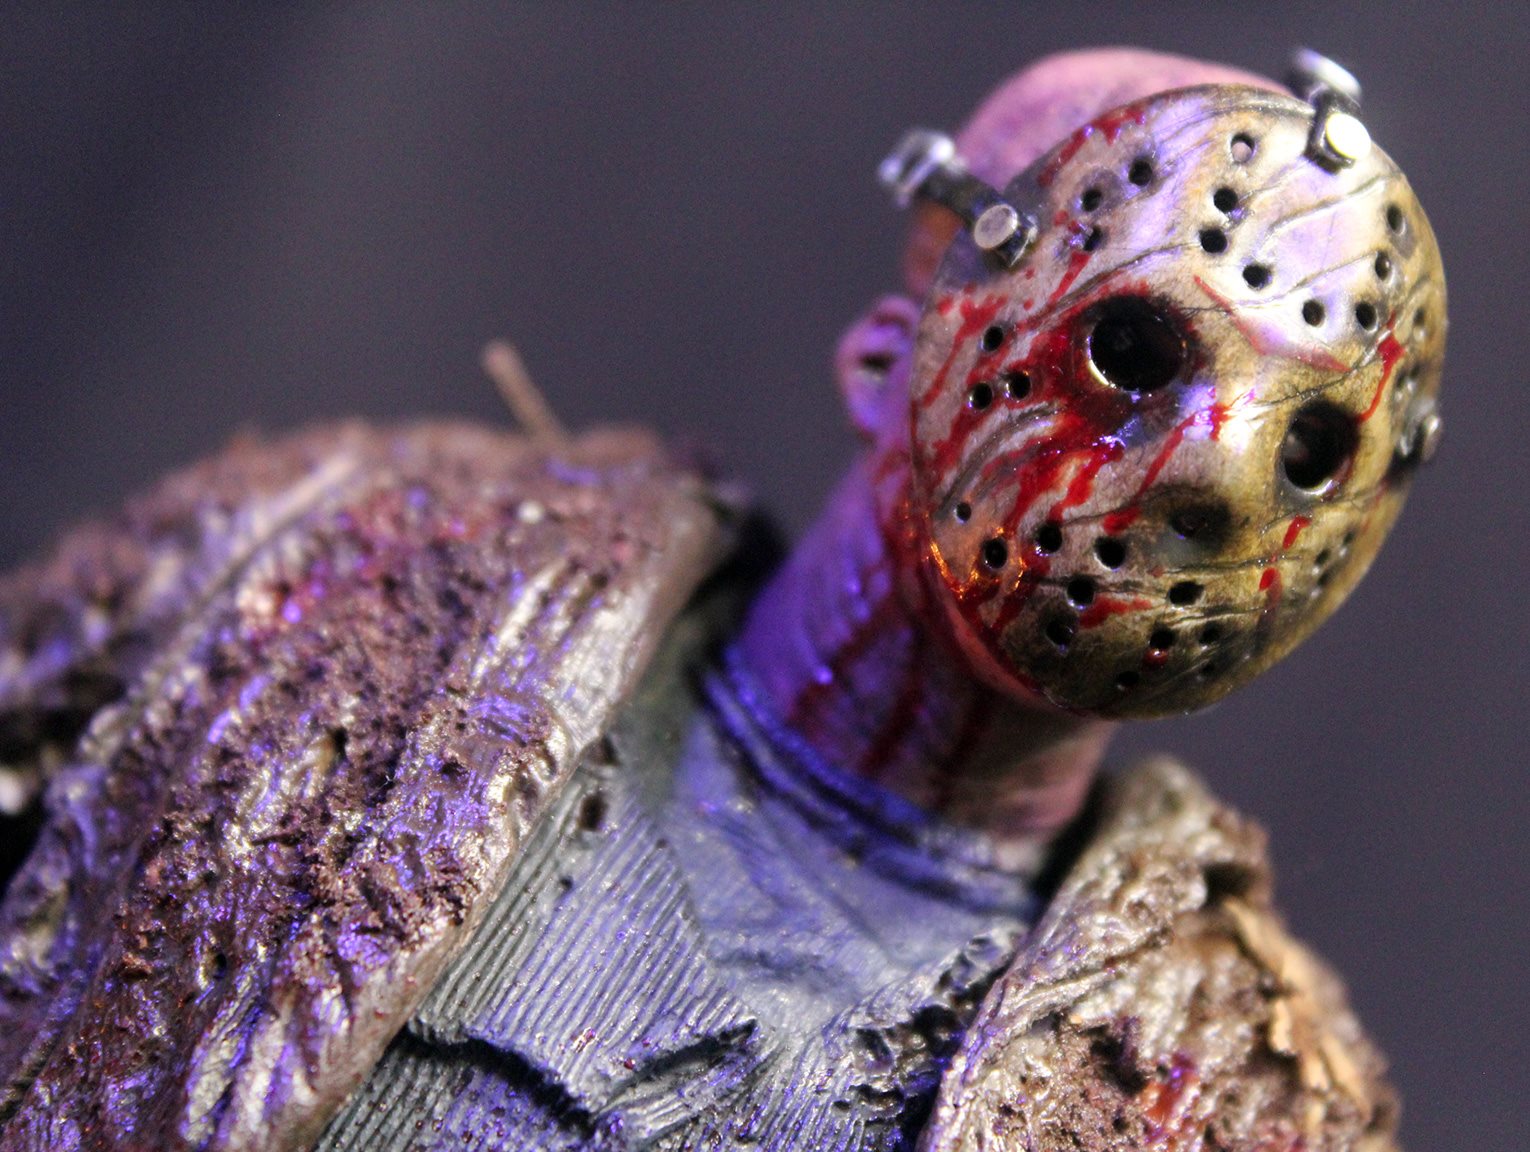 Check out what Custom Freek is doing with NECA figures – Jason edition